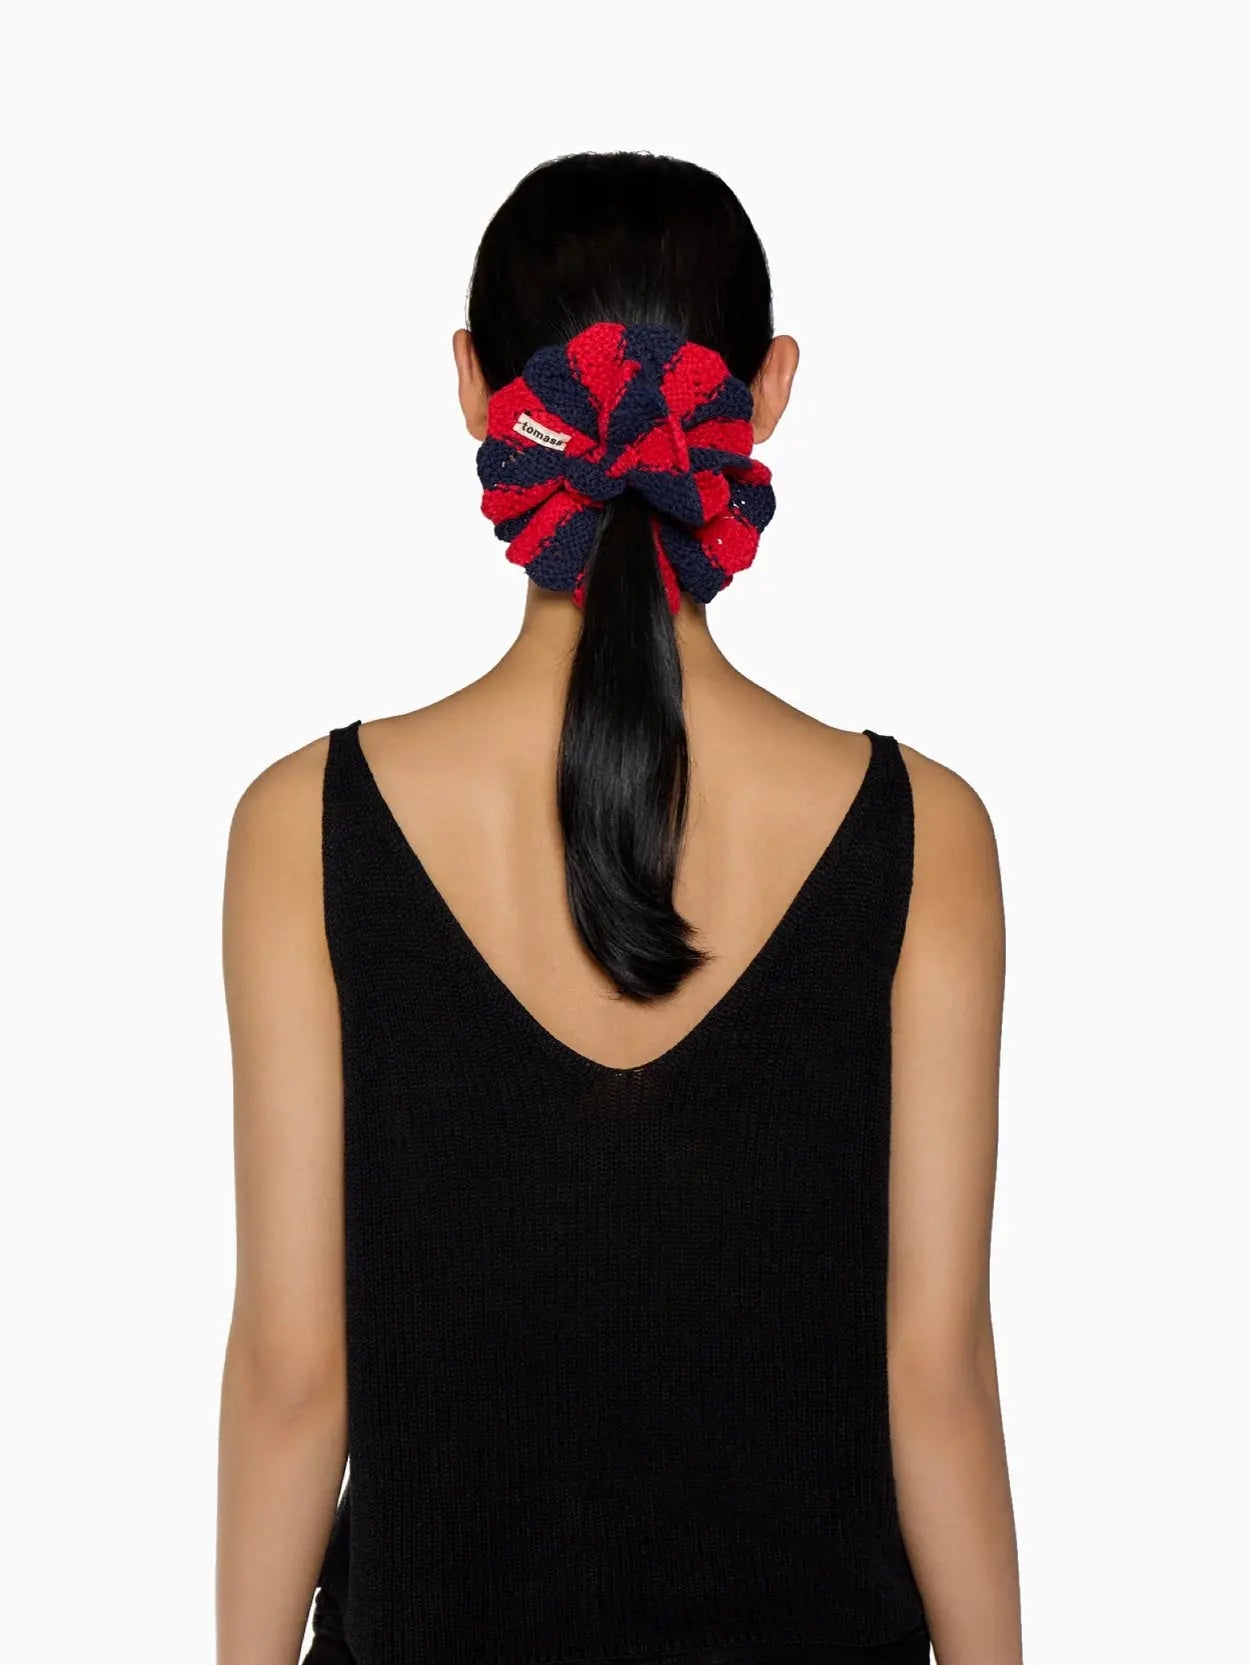 A circular hair scrunchie made of knitted fabric with alternating red and dark blue stripes, featuring a small white and red tag labeled "Tomasa." Perfect for any fashion enthusiast, this stylish accessory is now available at bassalstore in Barcelona. The background is plain white.